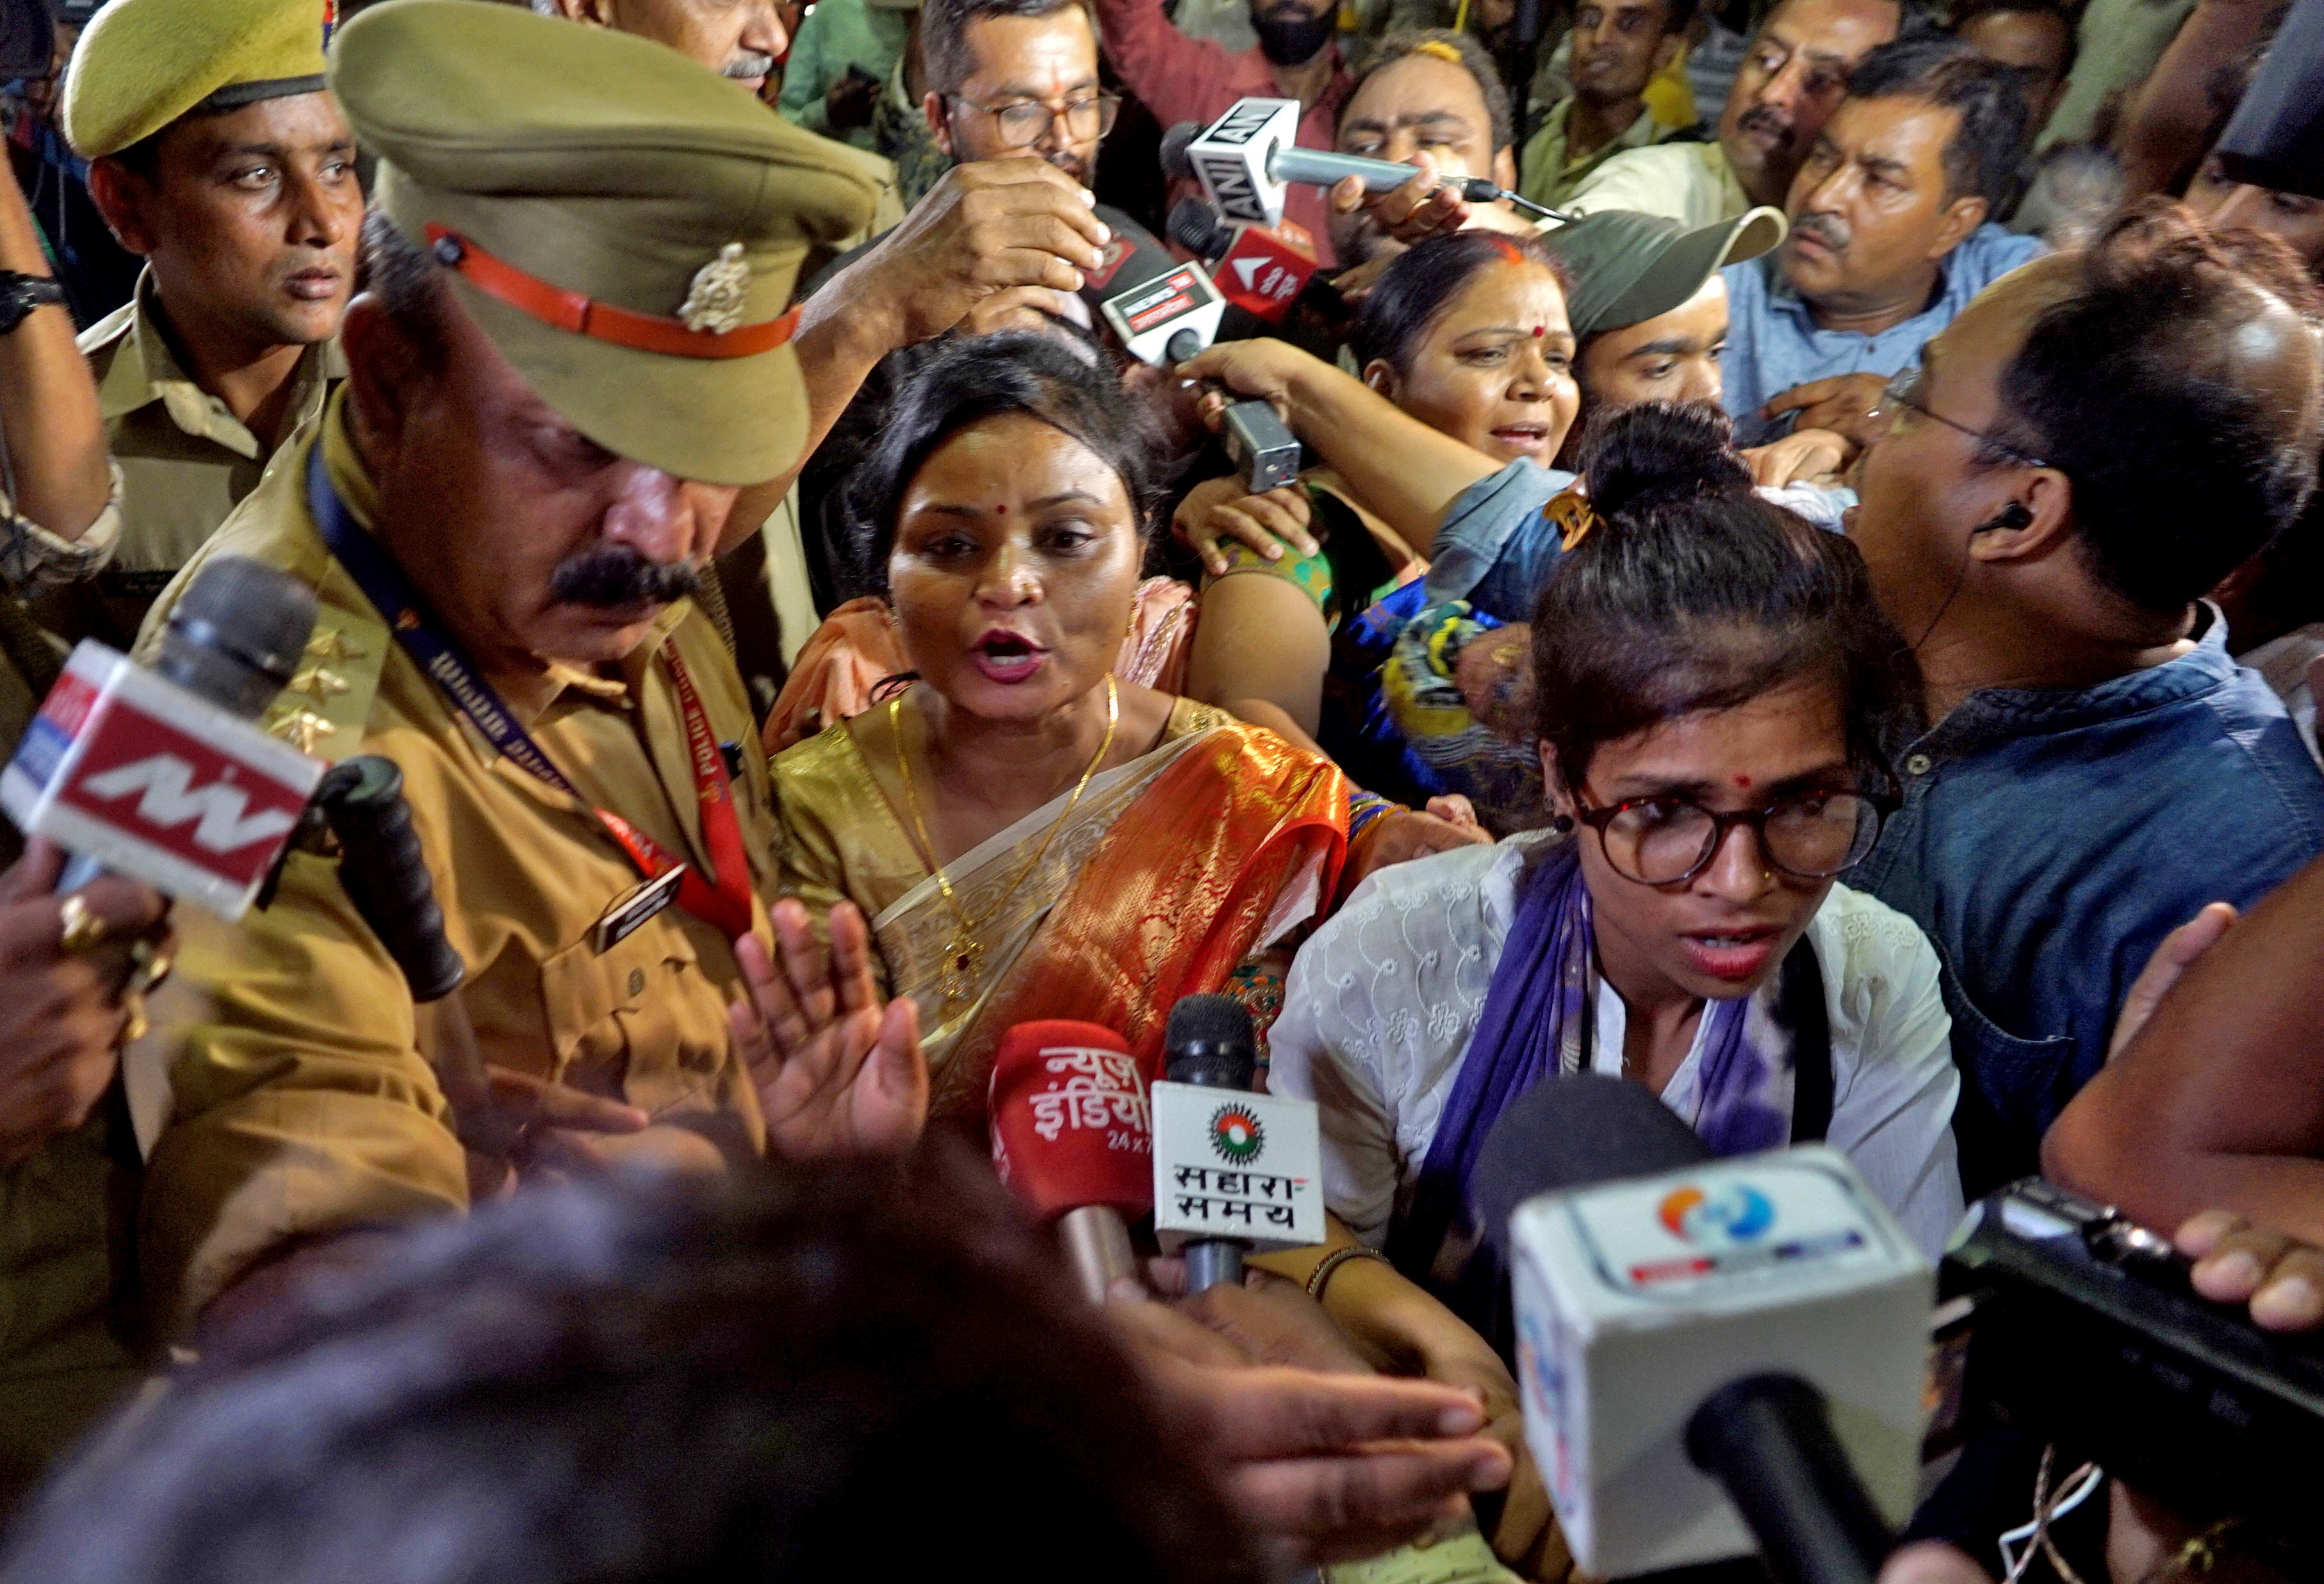 Rakhi Singh, Sita Sahu and Laxmi Devi speak with the media after they leave the mosque in Varanasi